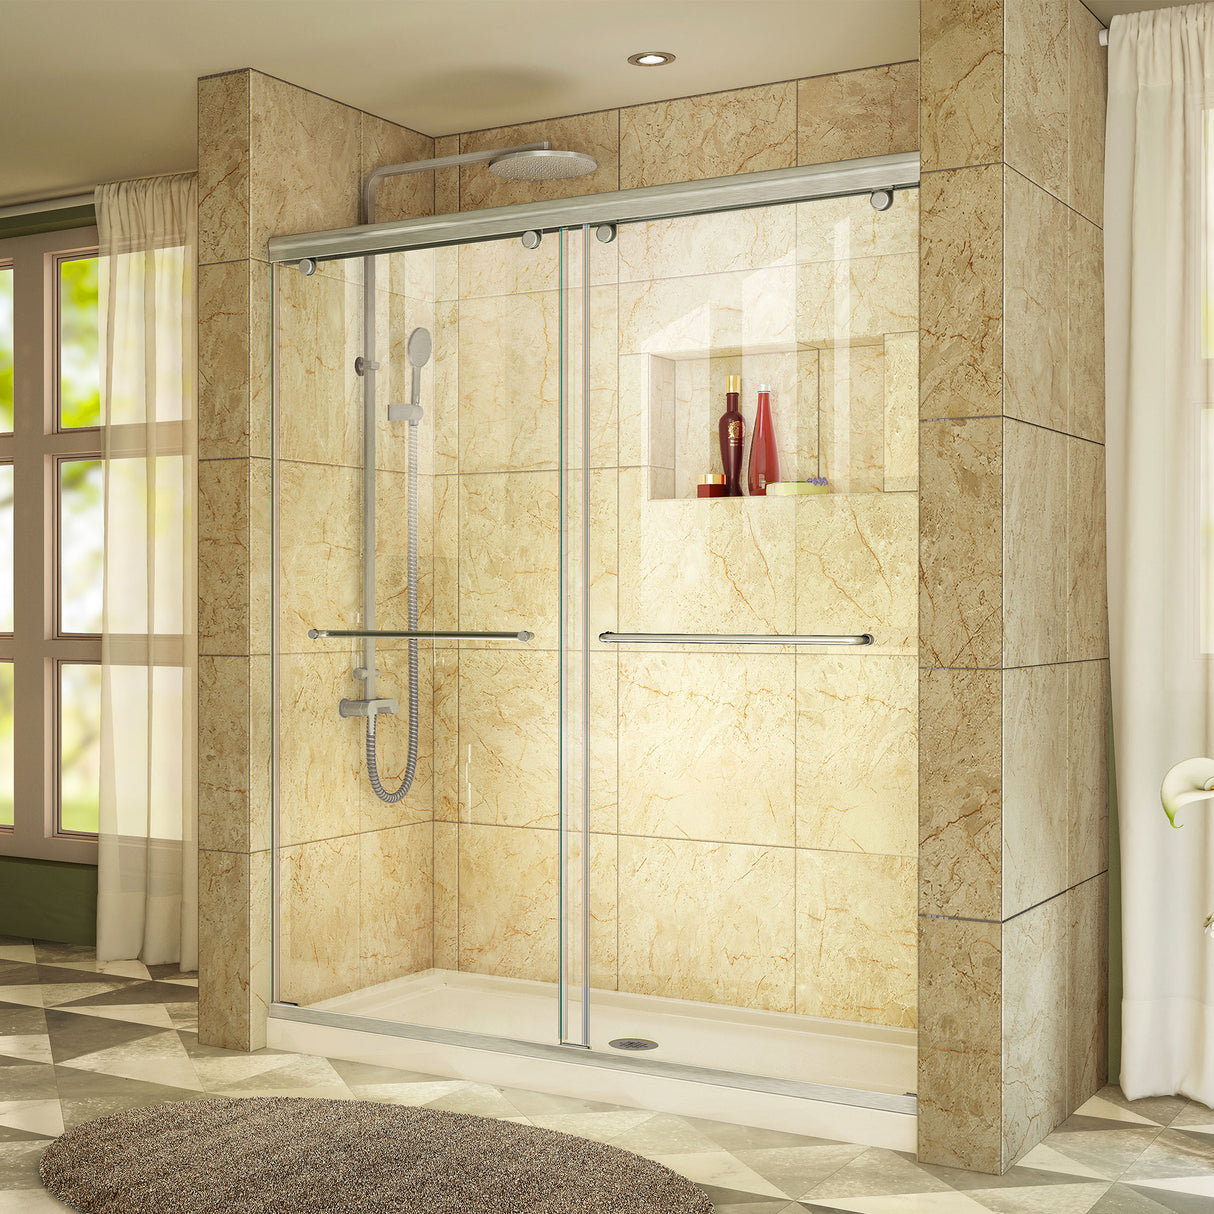 DreamLine Charisma 30 in. D x 60 in. W x 78 3/4 in. H Frameless Bypass Shower Door in Brushed Nickel and Center Drain Biscuit Base